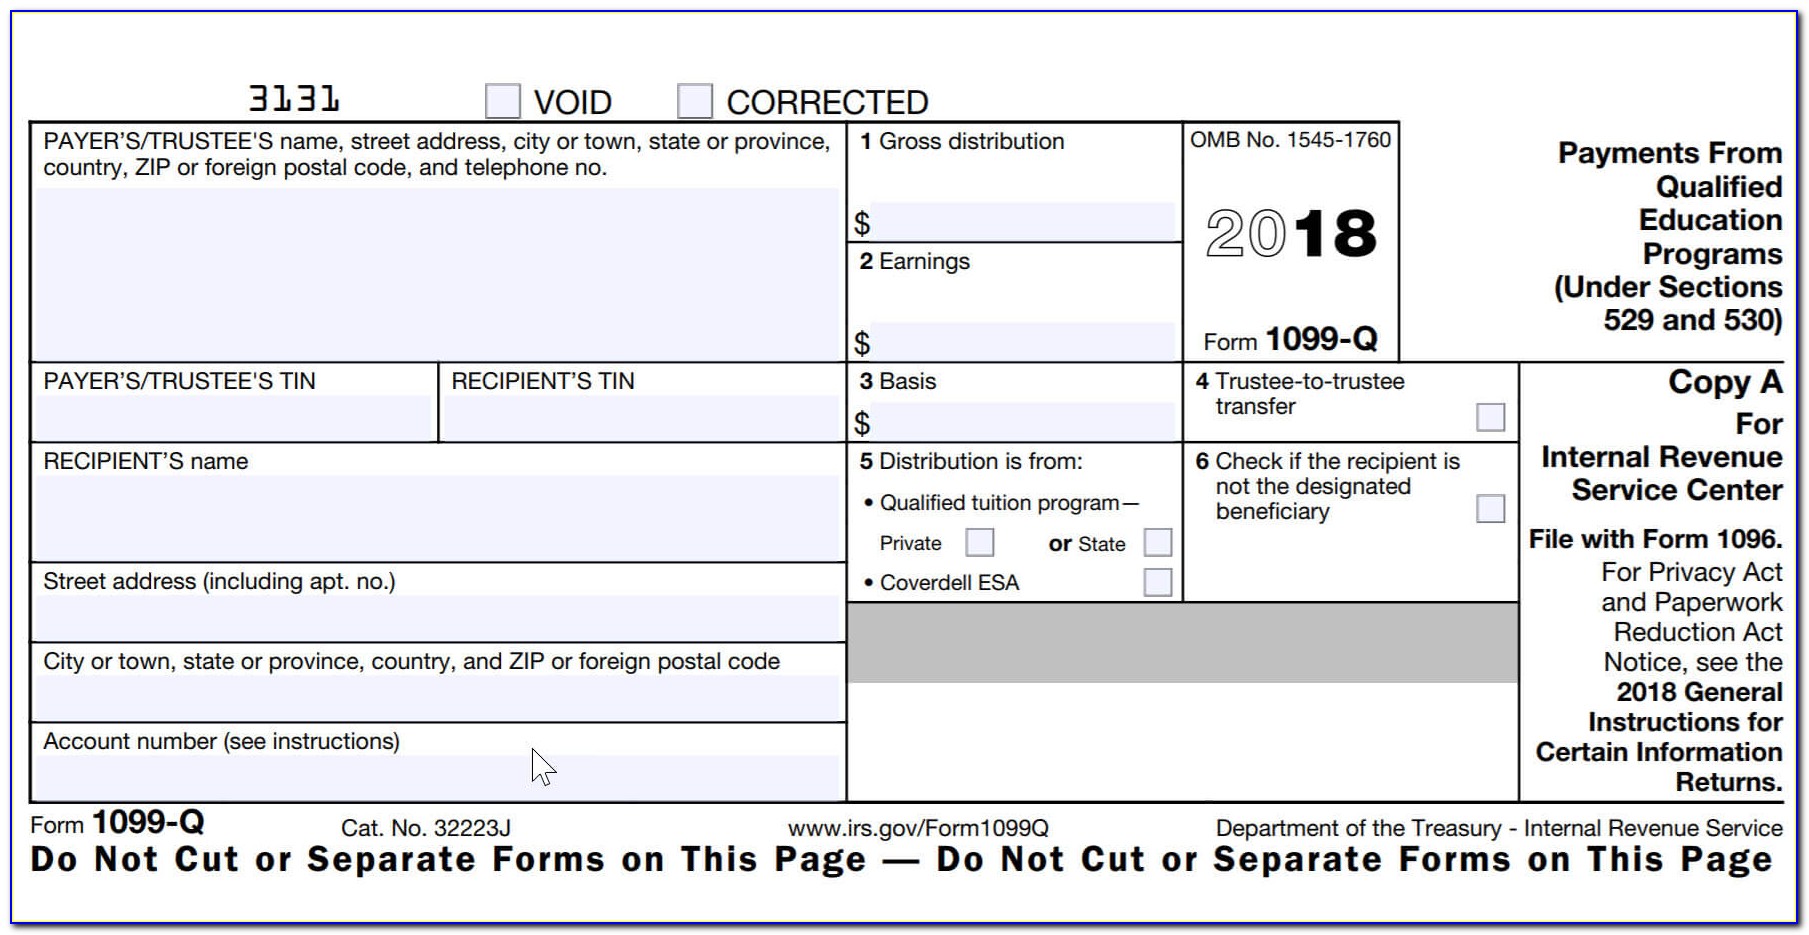 Tax Forms 1099 And 1096